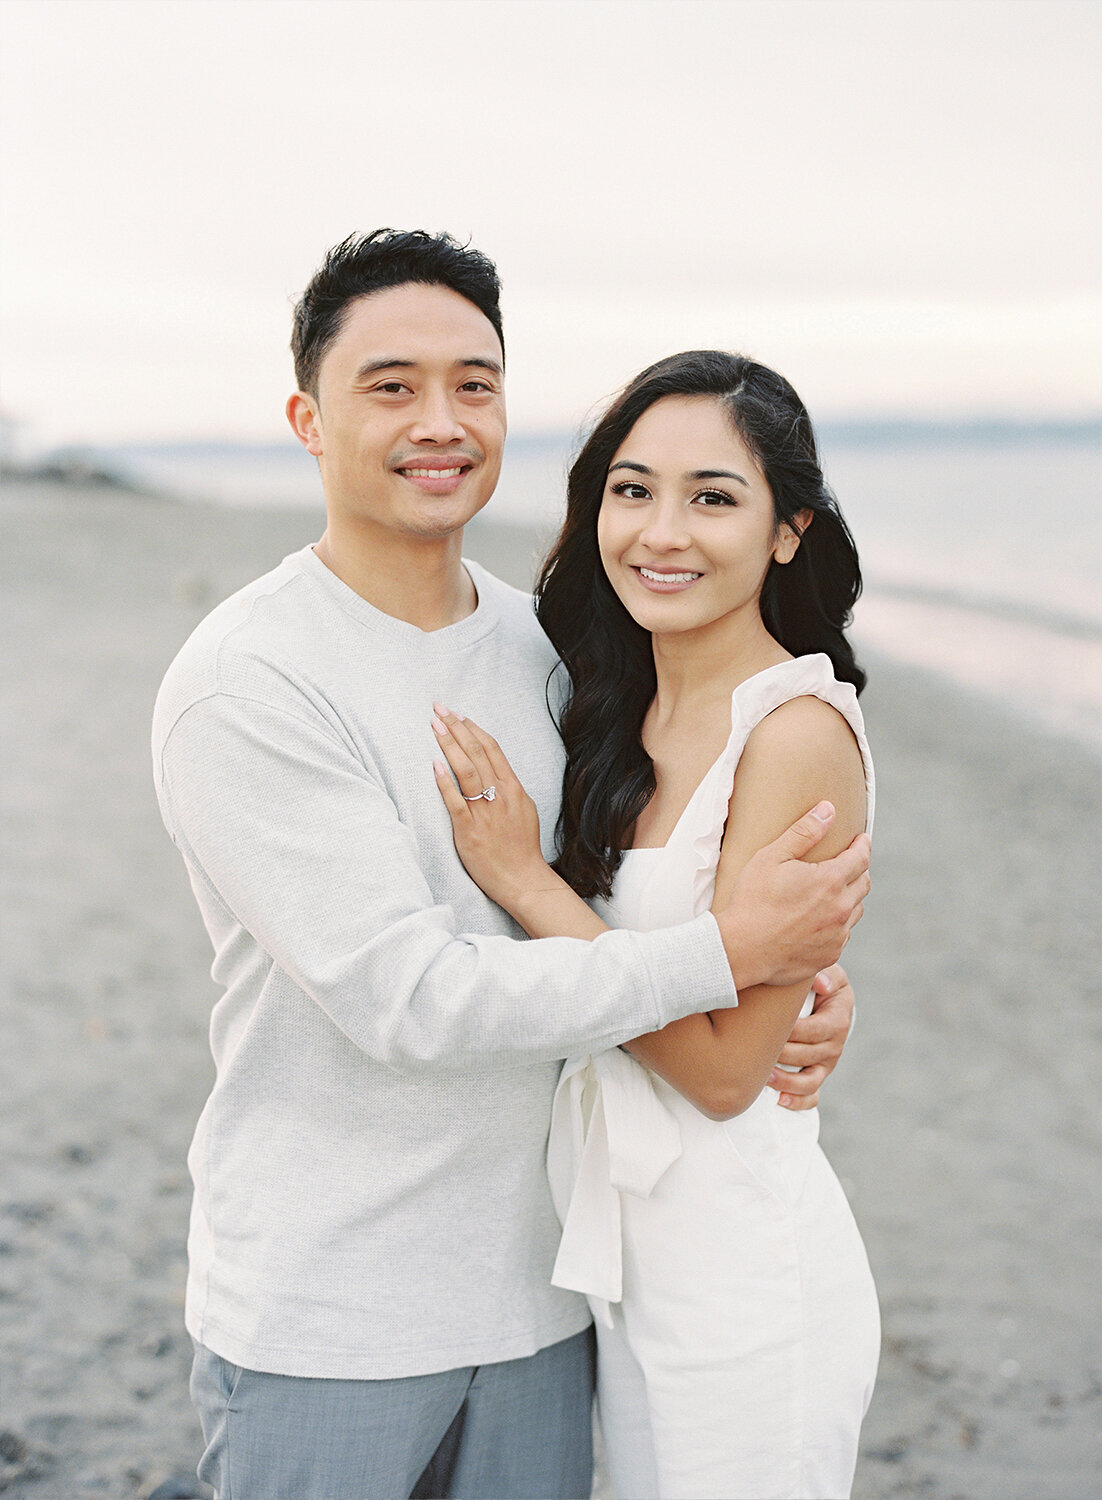 Seattle City Engagement Session on Film - Tetiana Photography - D&AJ - 14